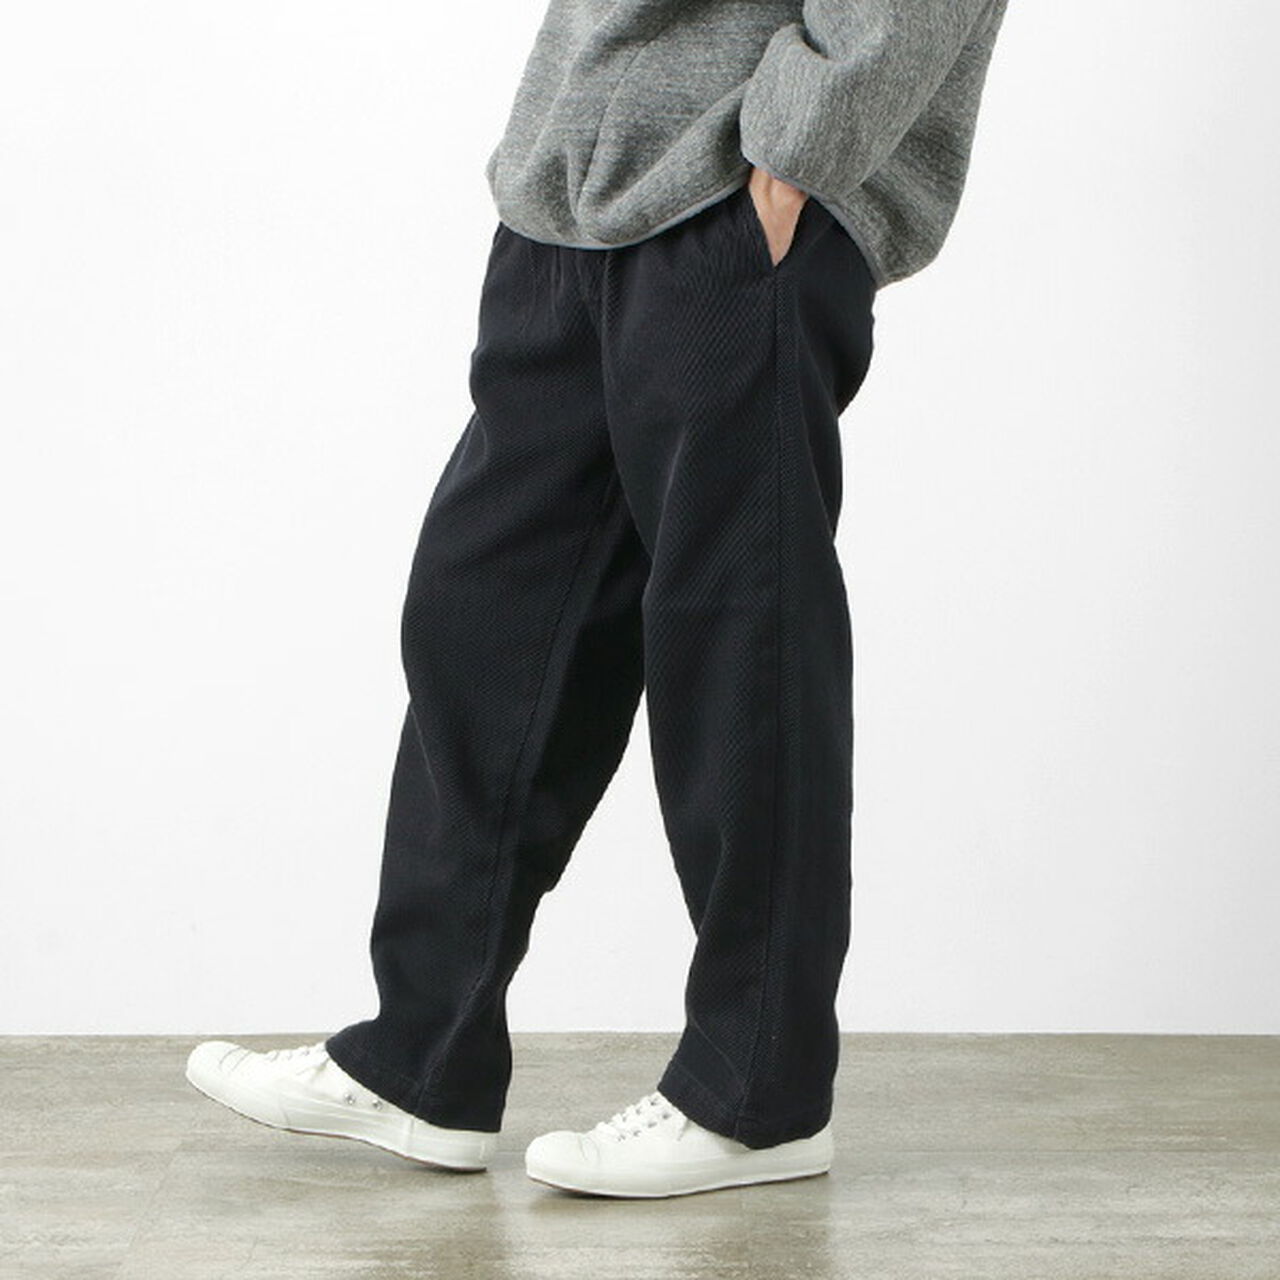 2-Tuck Calze Pants,Navy, large image number 0